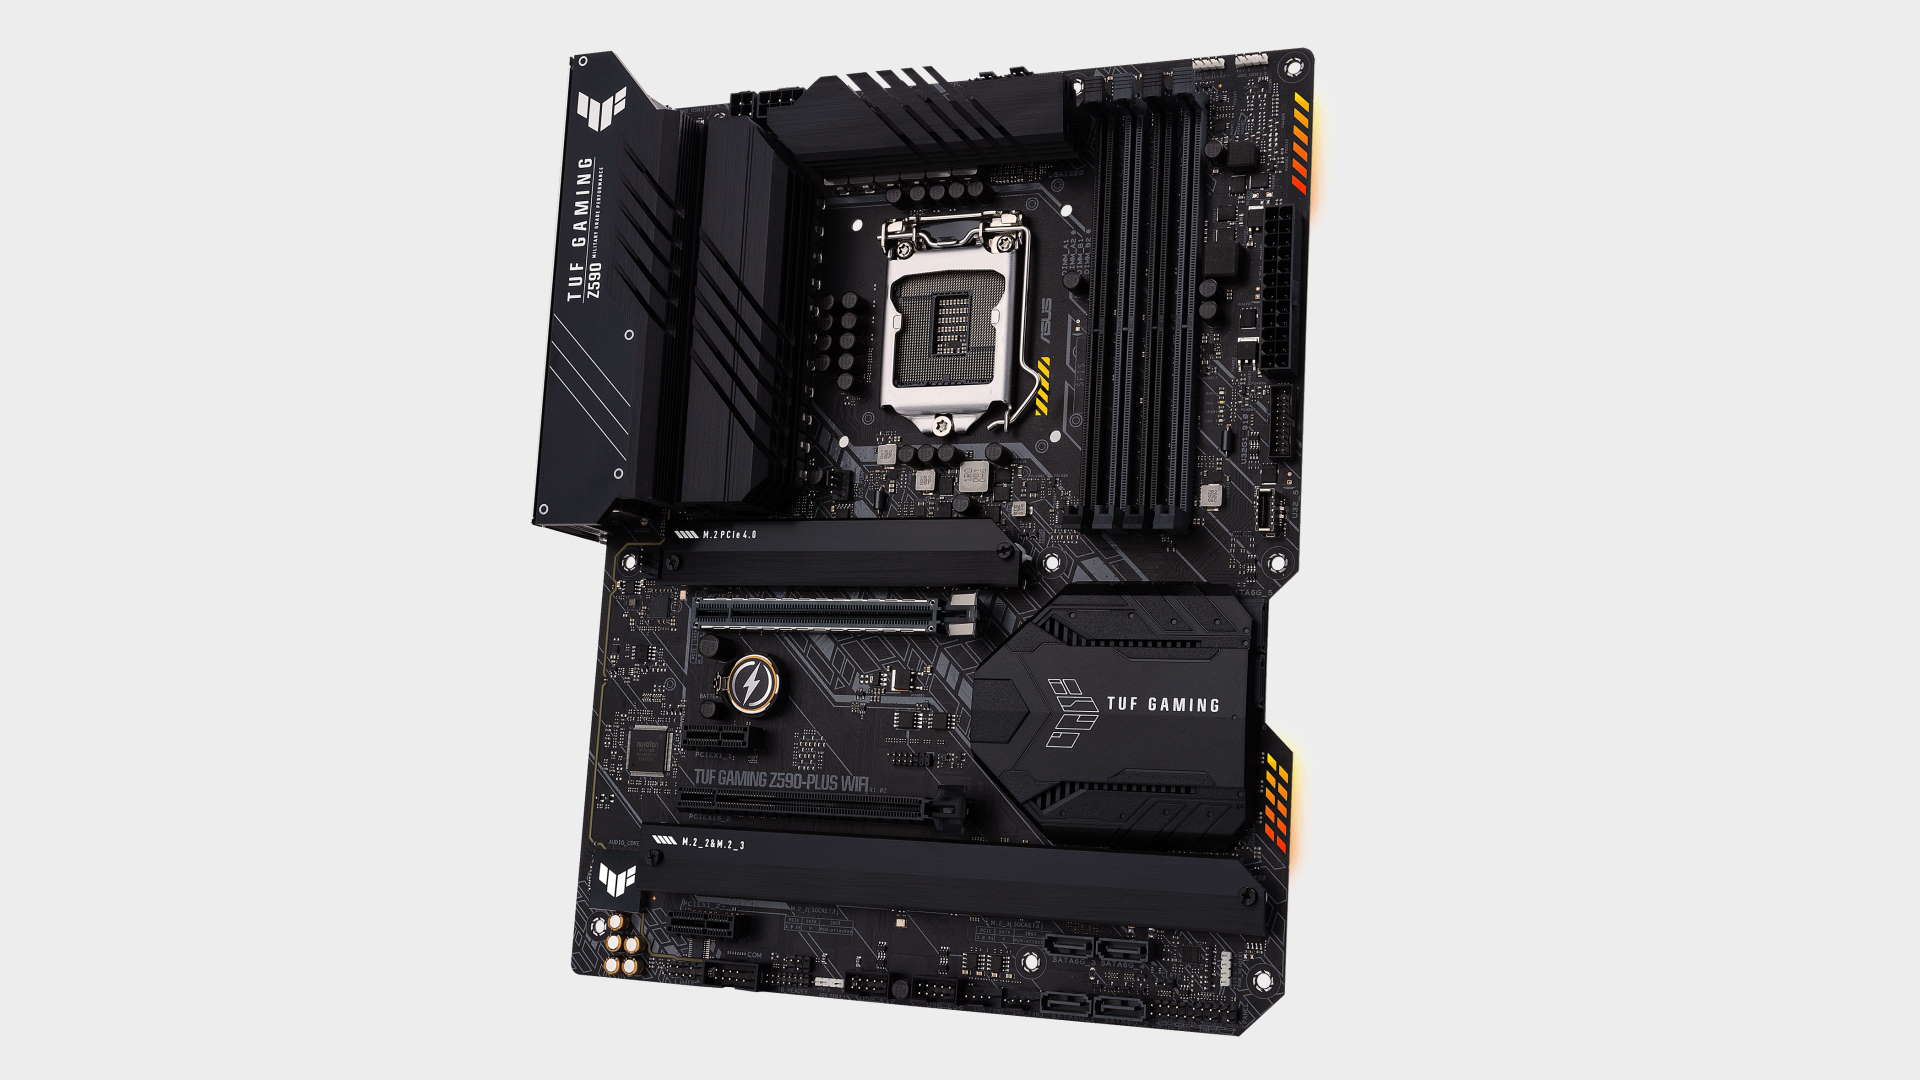 Image of the Asus TUF Gaming Z590 Plus gaming motherboard top down on a grey background.